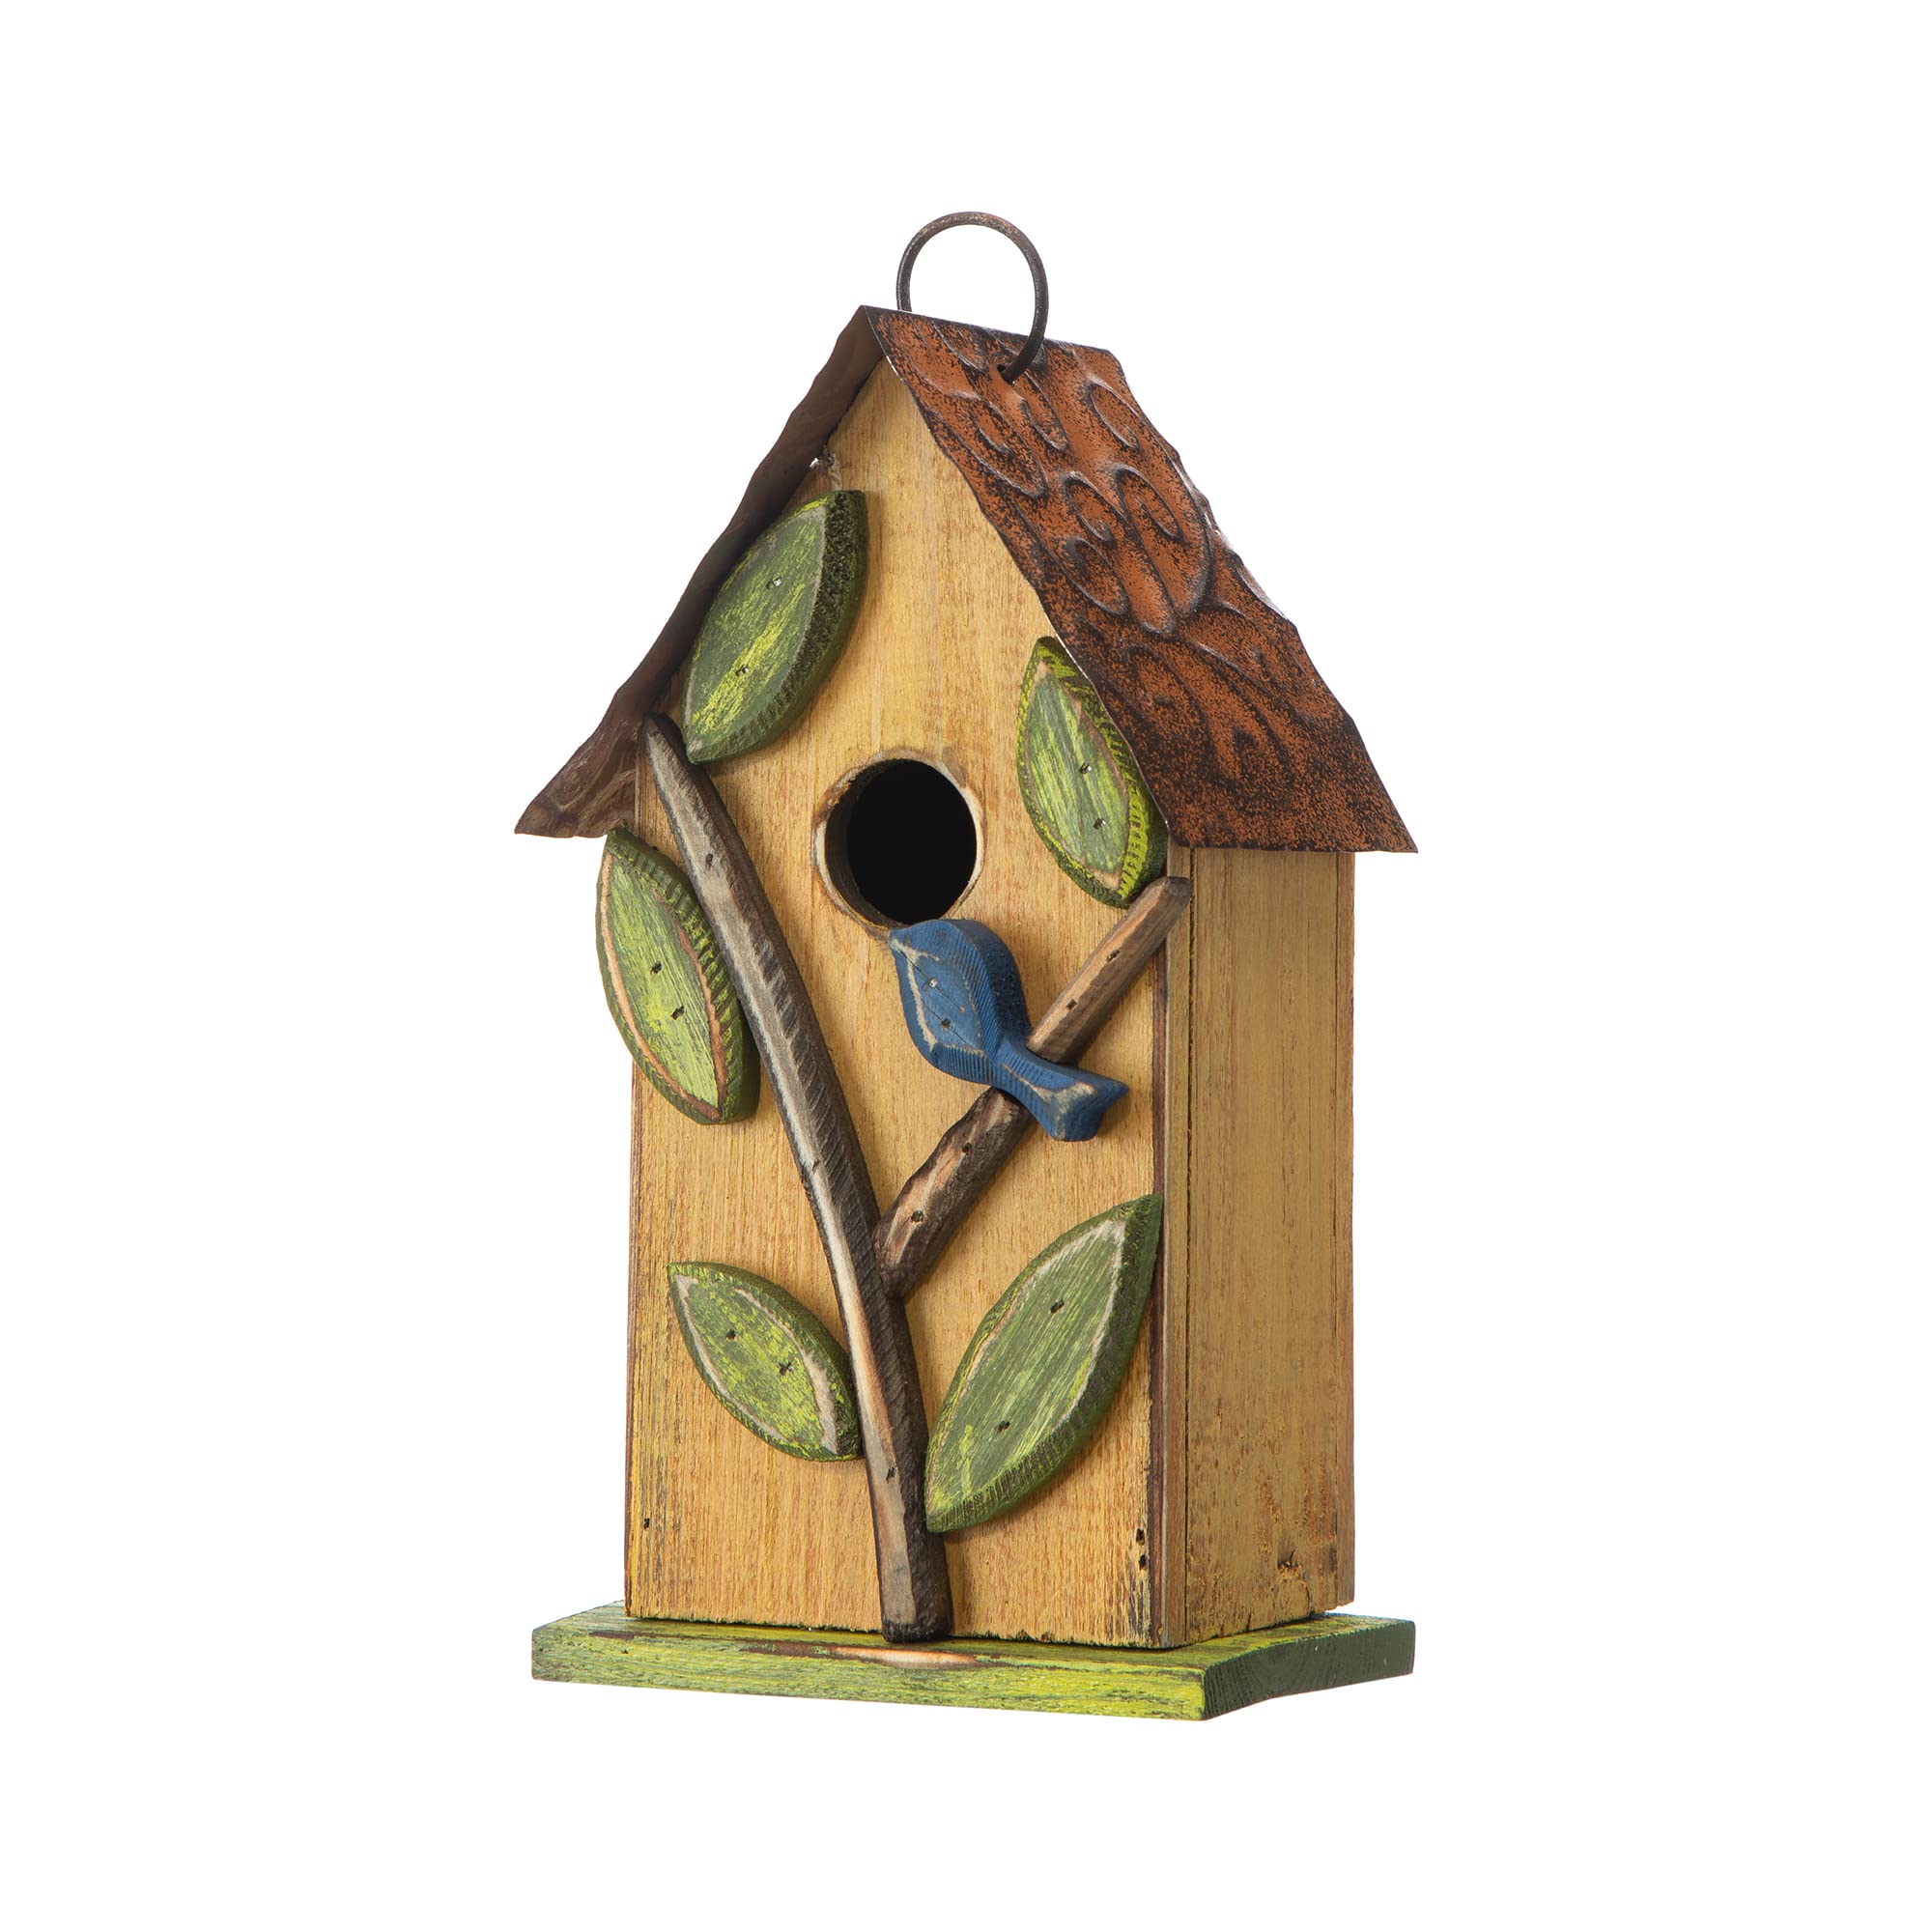 Glitzhome 97 H Hanging Birdhouse For Outdoor Patio Garden Decorative Pet Cottage Distressed Wooden Birdhouse, Leaves Rustic Yell